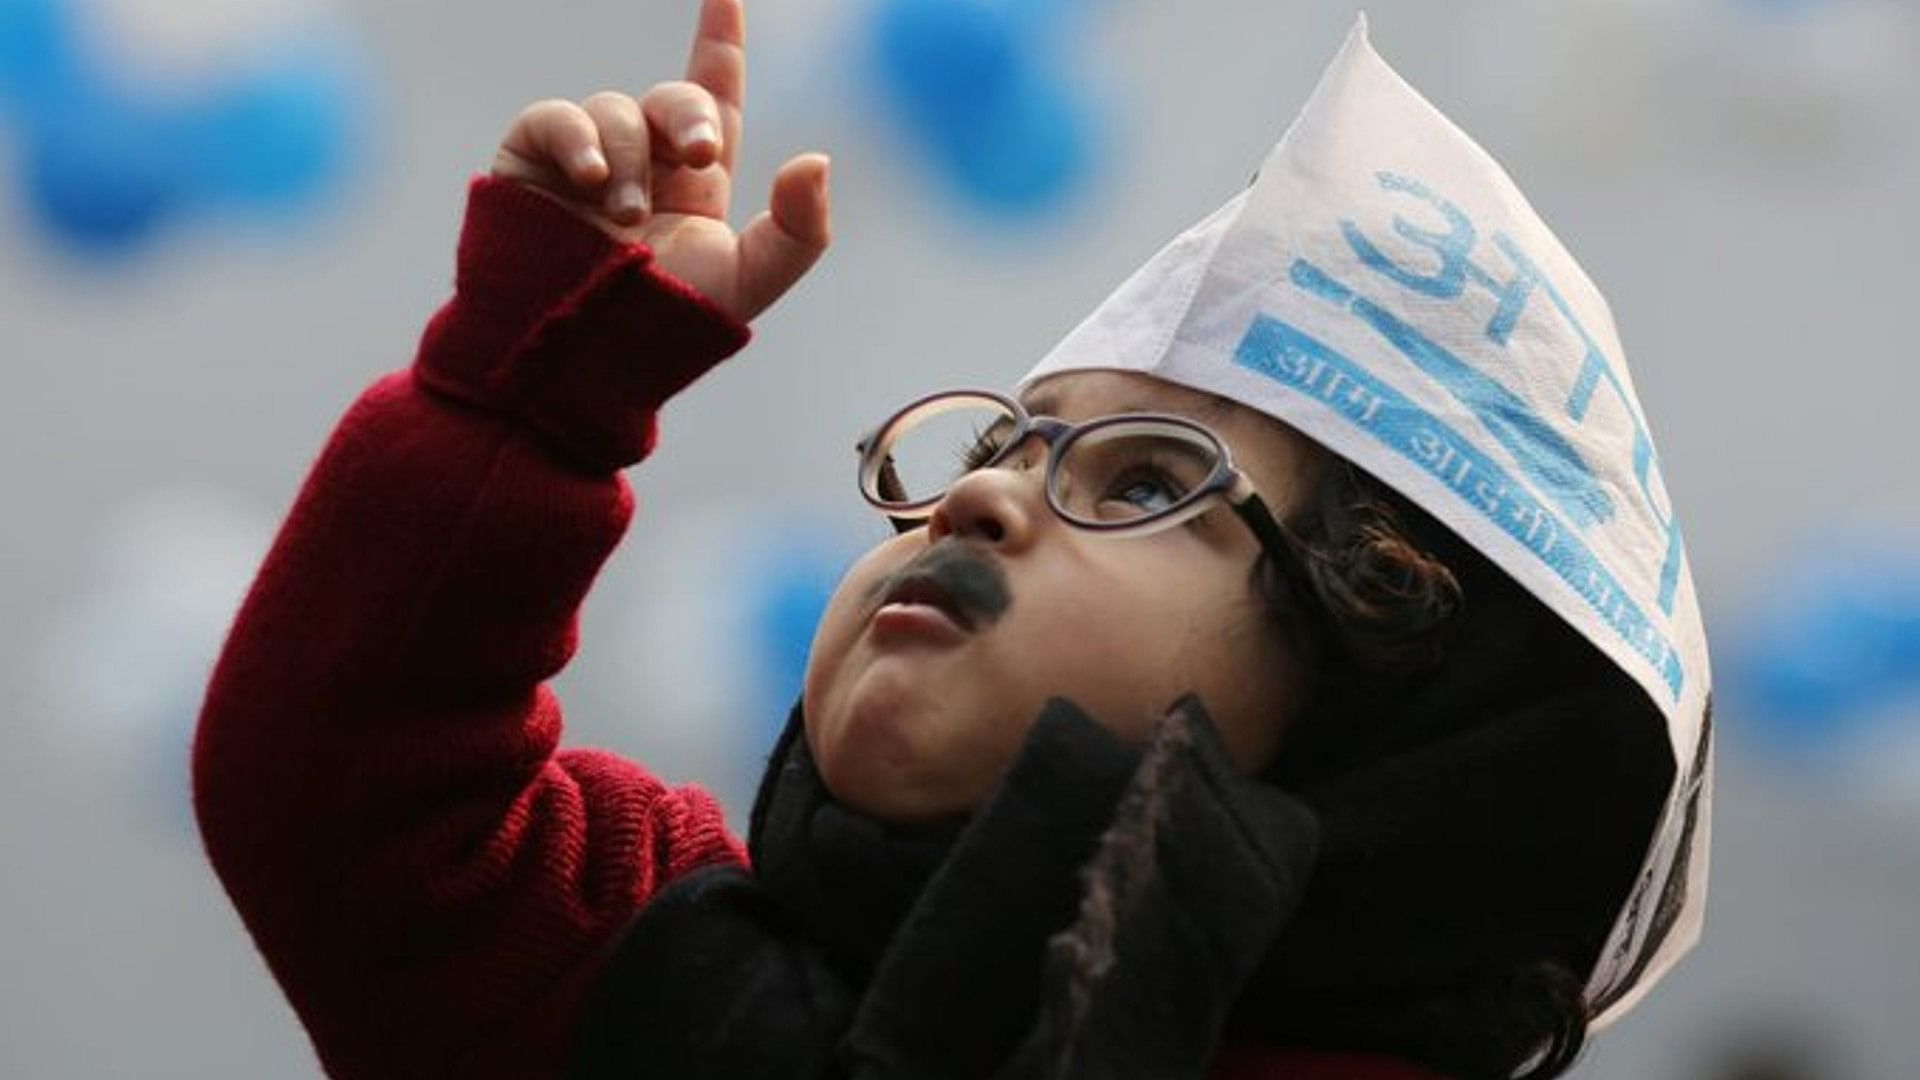 Baby Kejriwal Know who is Baby Kejriwal who always viral during election results